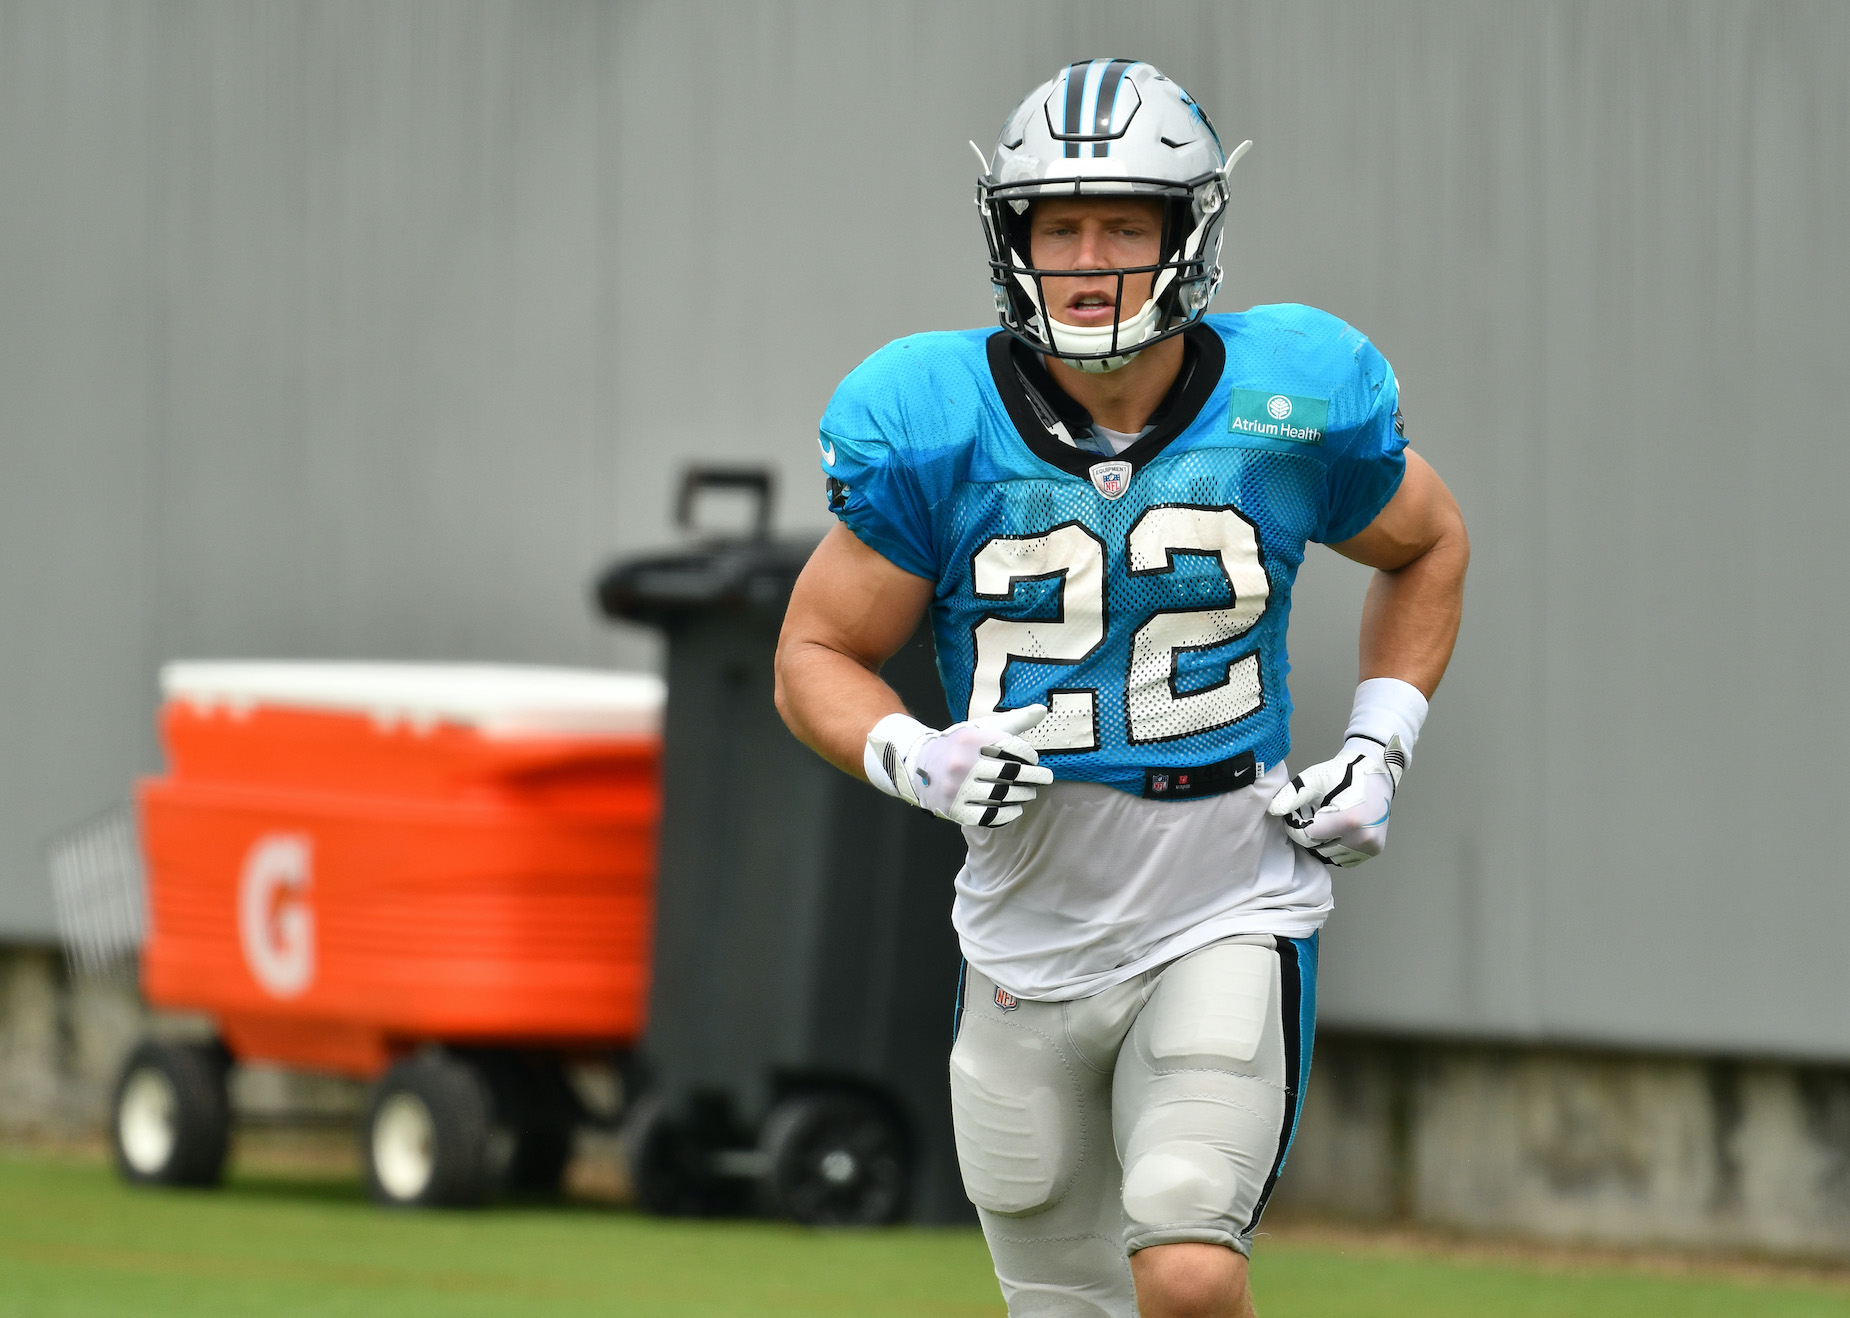 Carolina Panthers running back Christian McCaffrey had a pretty terrible 2020 season, but thinks it can all be a positive in the big picture.